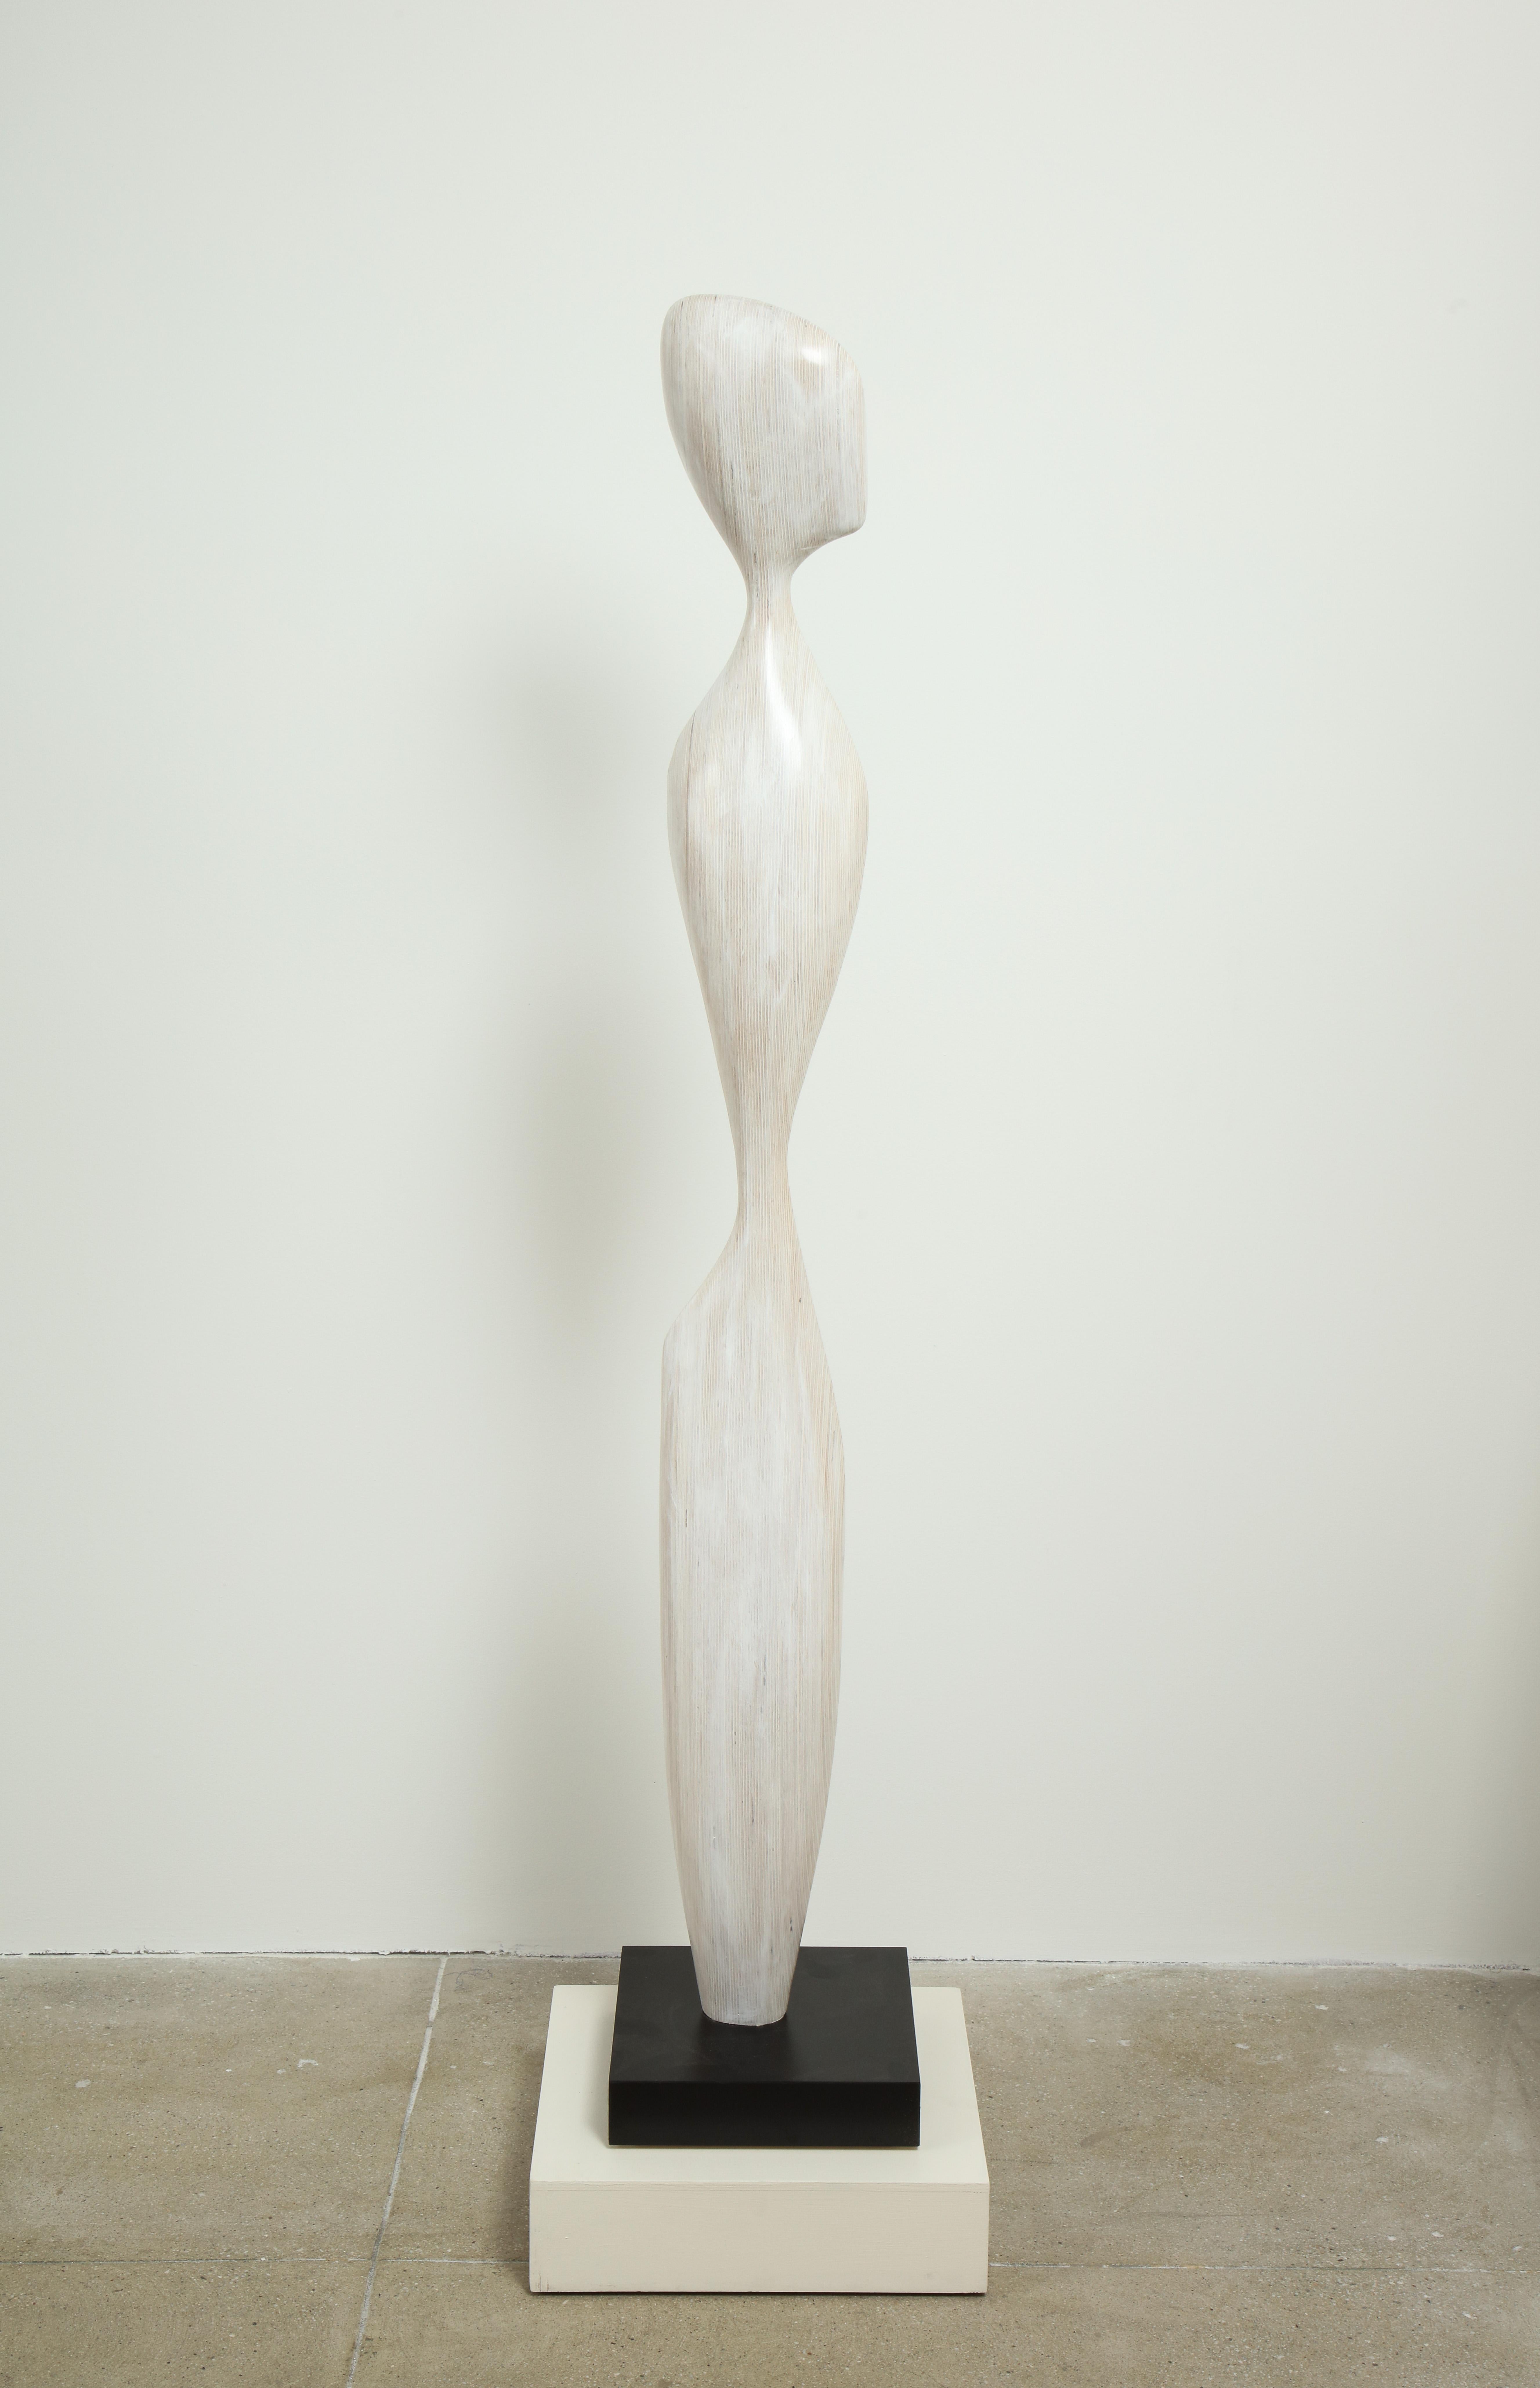 'Standing Figure' by Dick Shanley 
Medium: Laminated birch wood mounted on a black granite square base
Signed: DS 
Size: 67